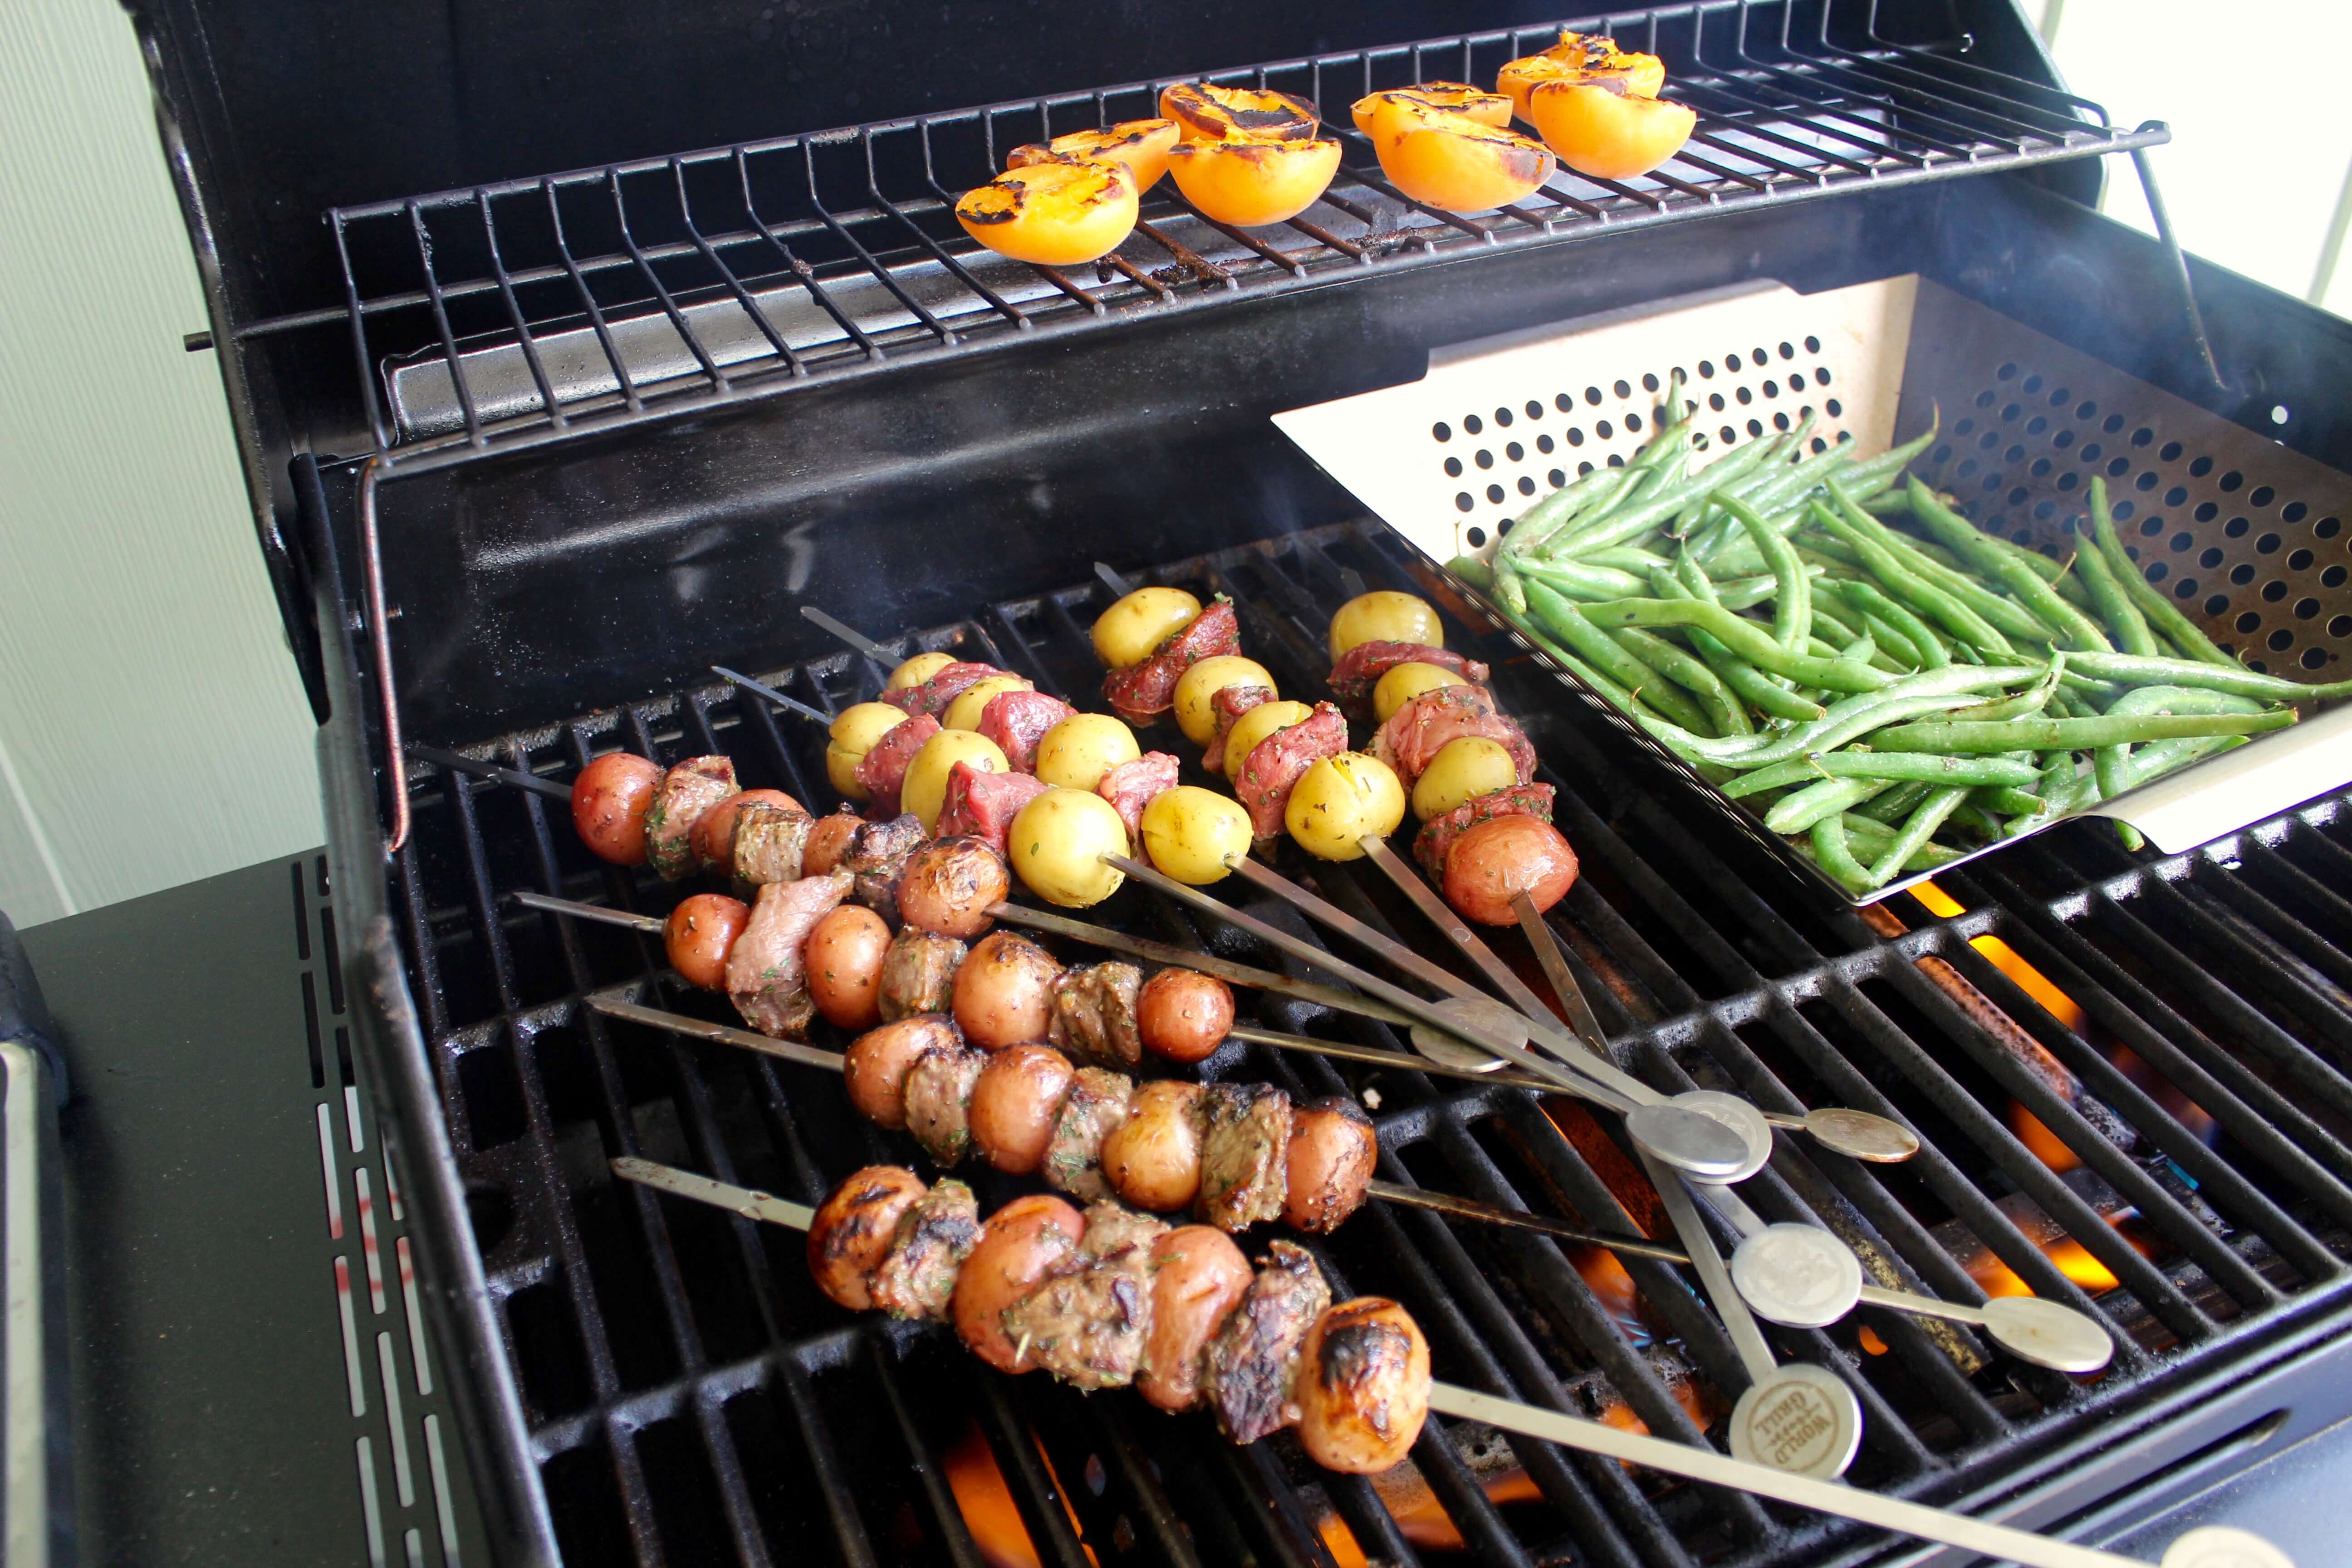 Outdoor Propane Grilling for Any Meal (an introduction)